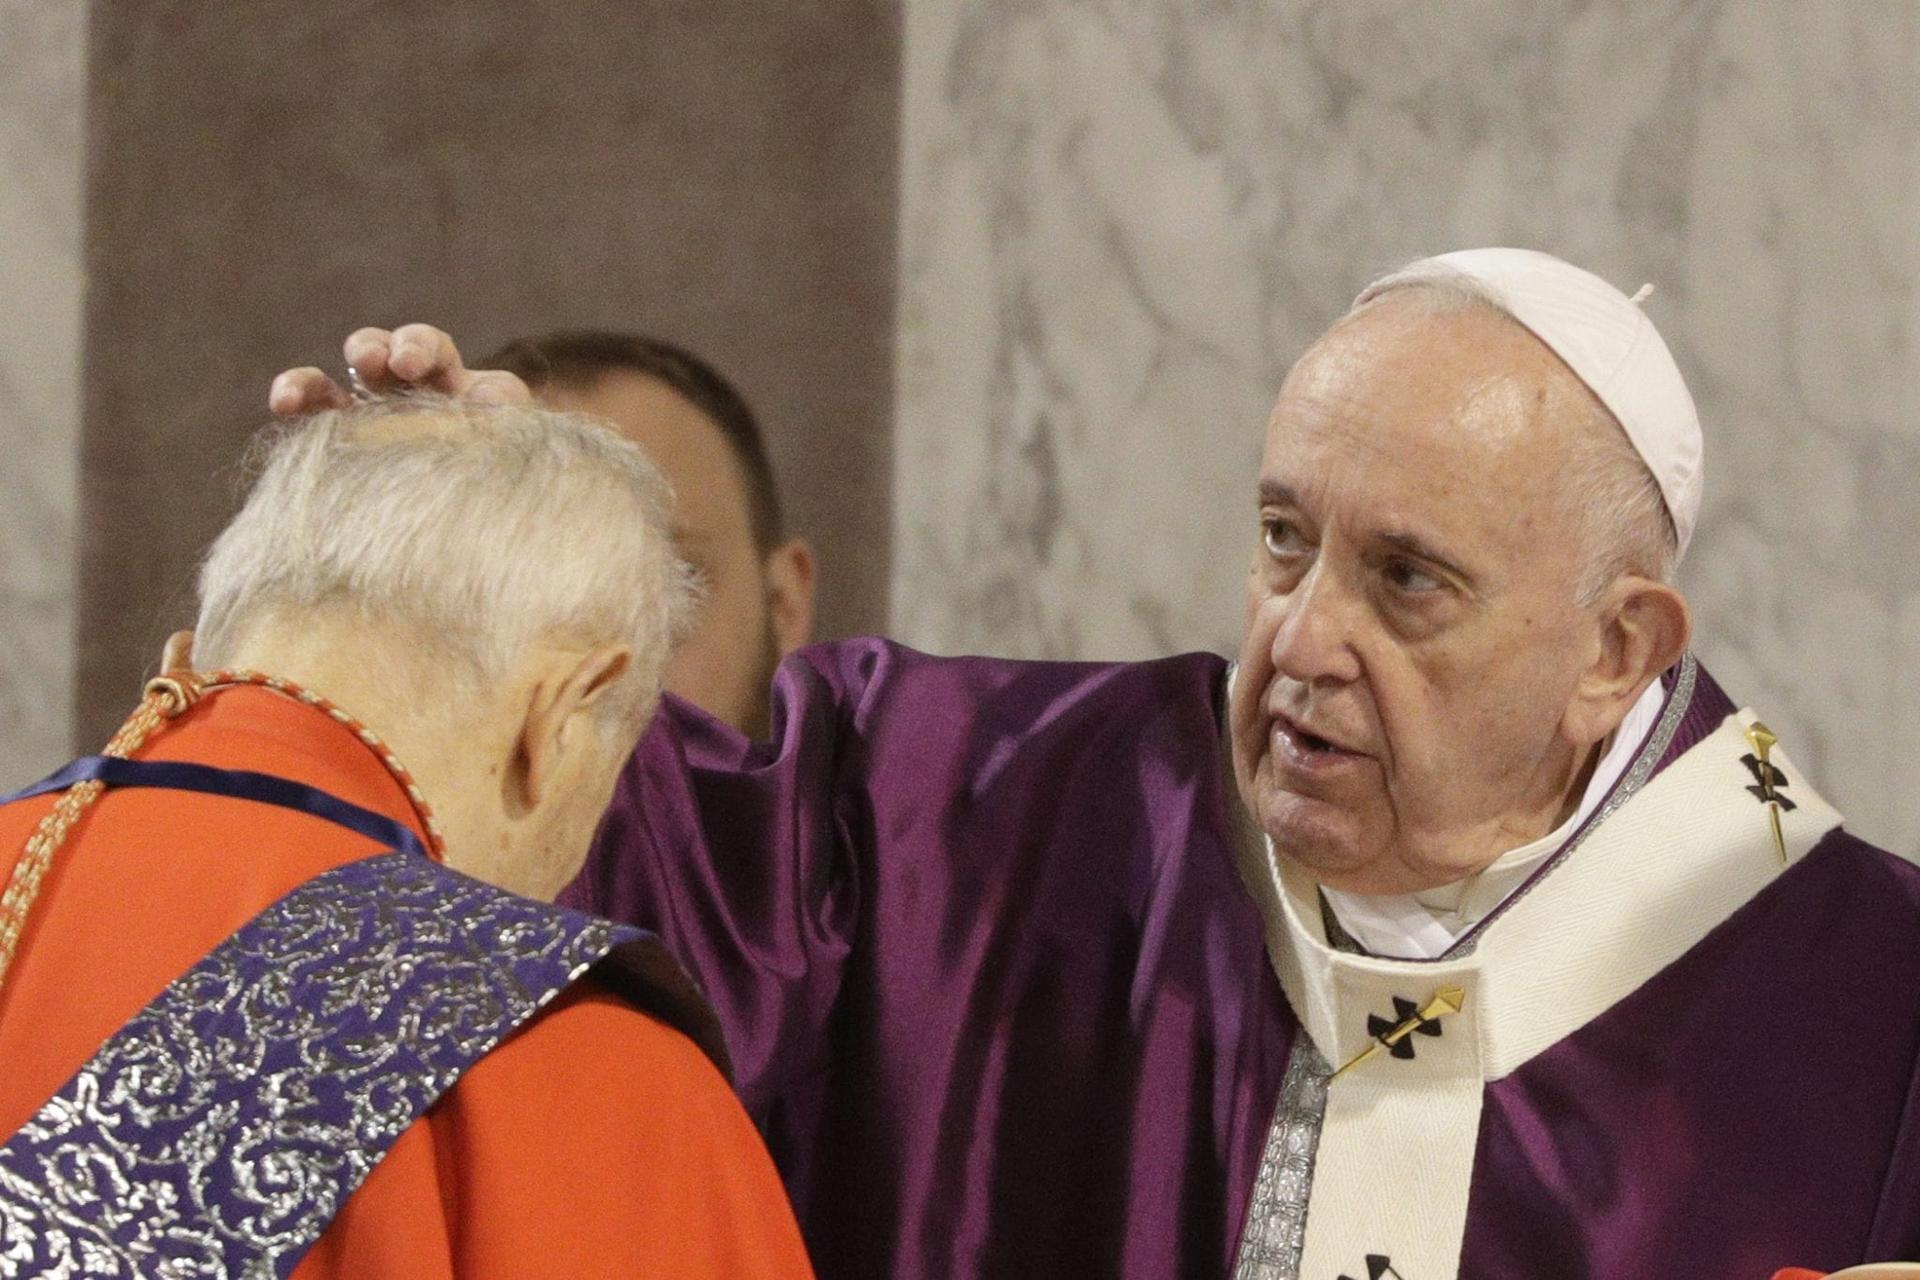 For Lent, Pope asks Christians to focus on Cross as ‘silent throne of God’